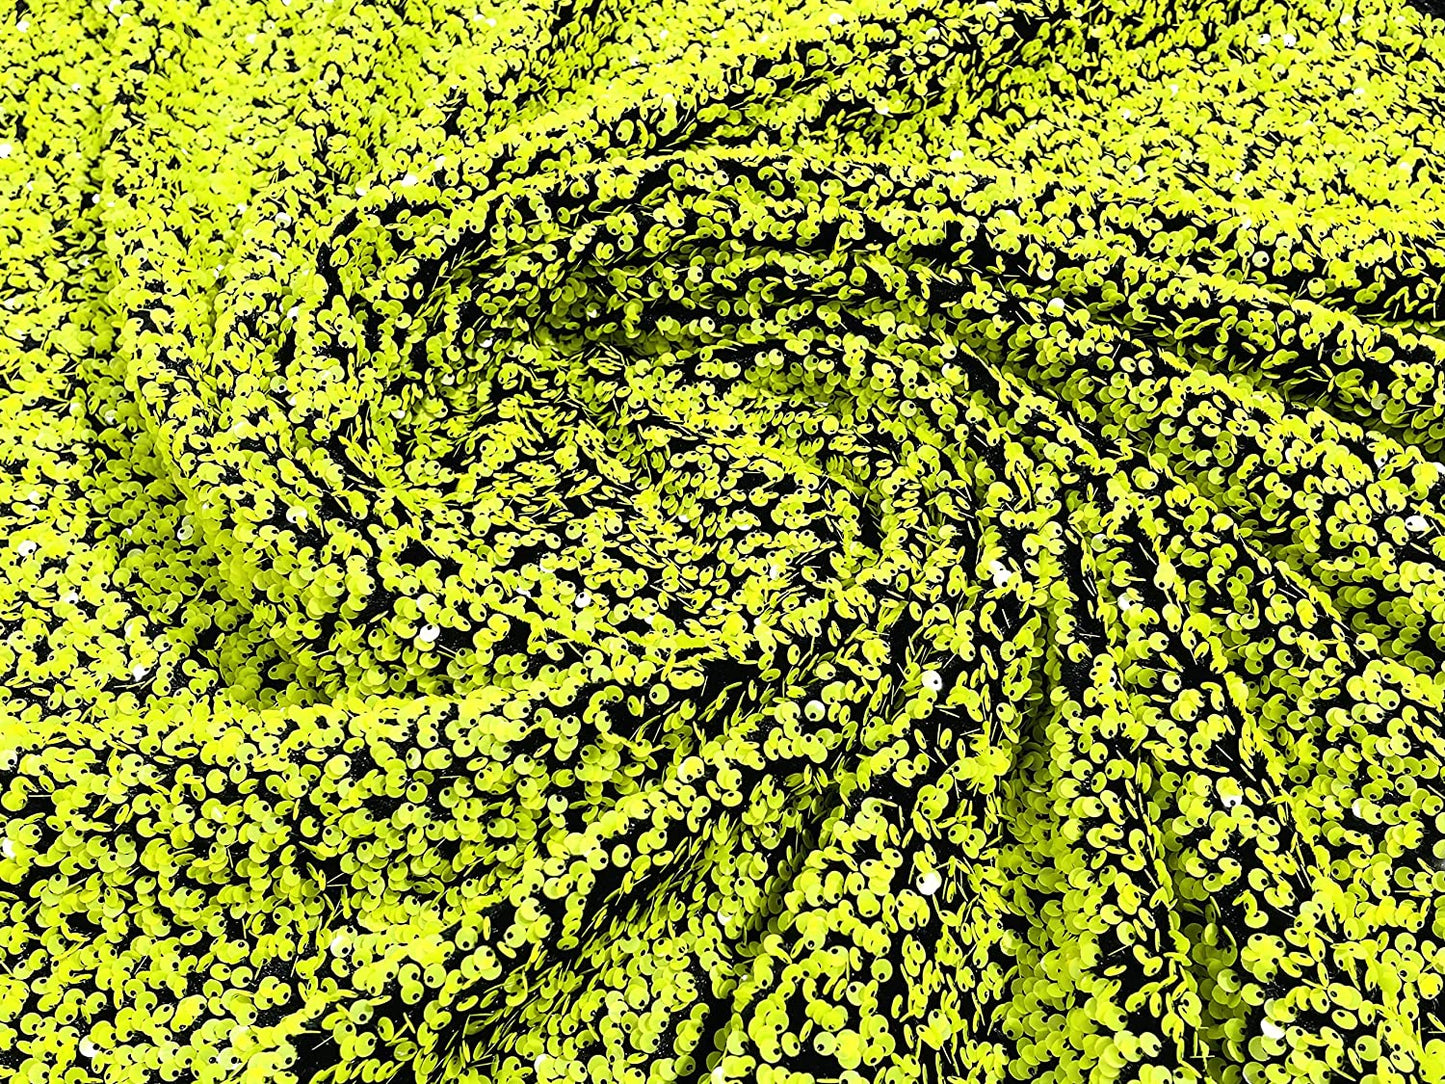 Shiny 5mm Sequin On A 2 Way Stretch Velvet (1 Yard, Lime Green/Black)